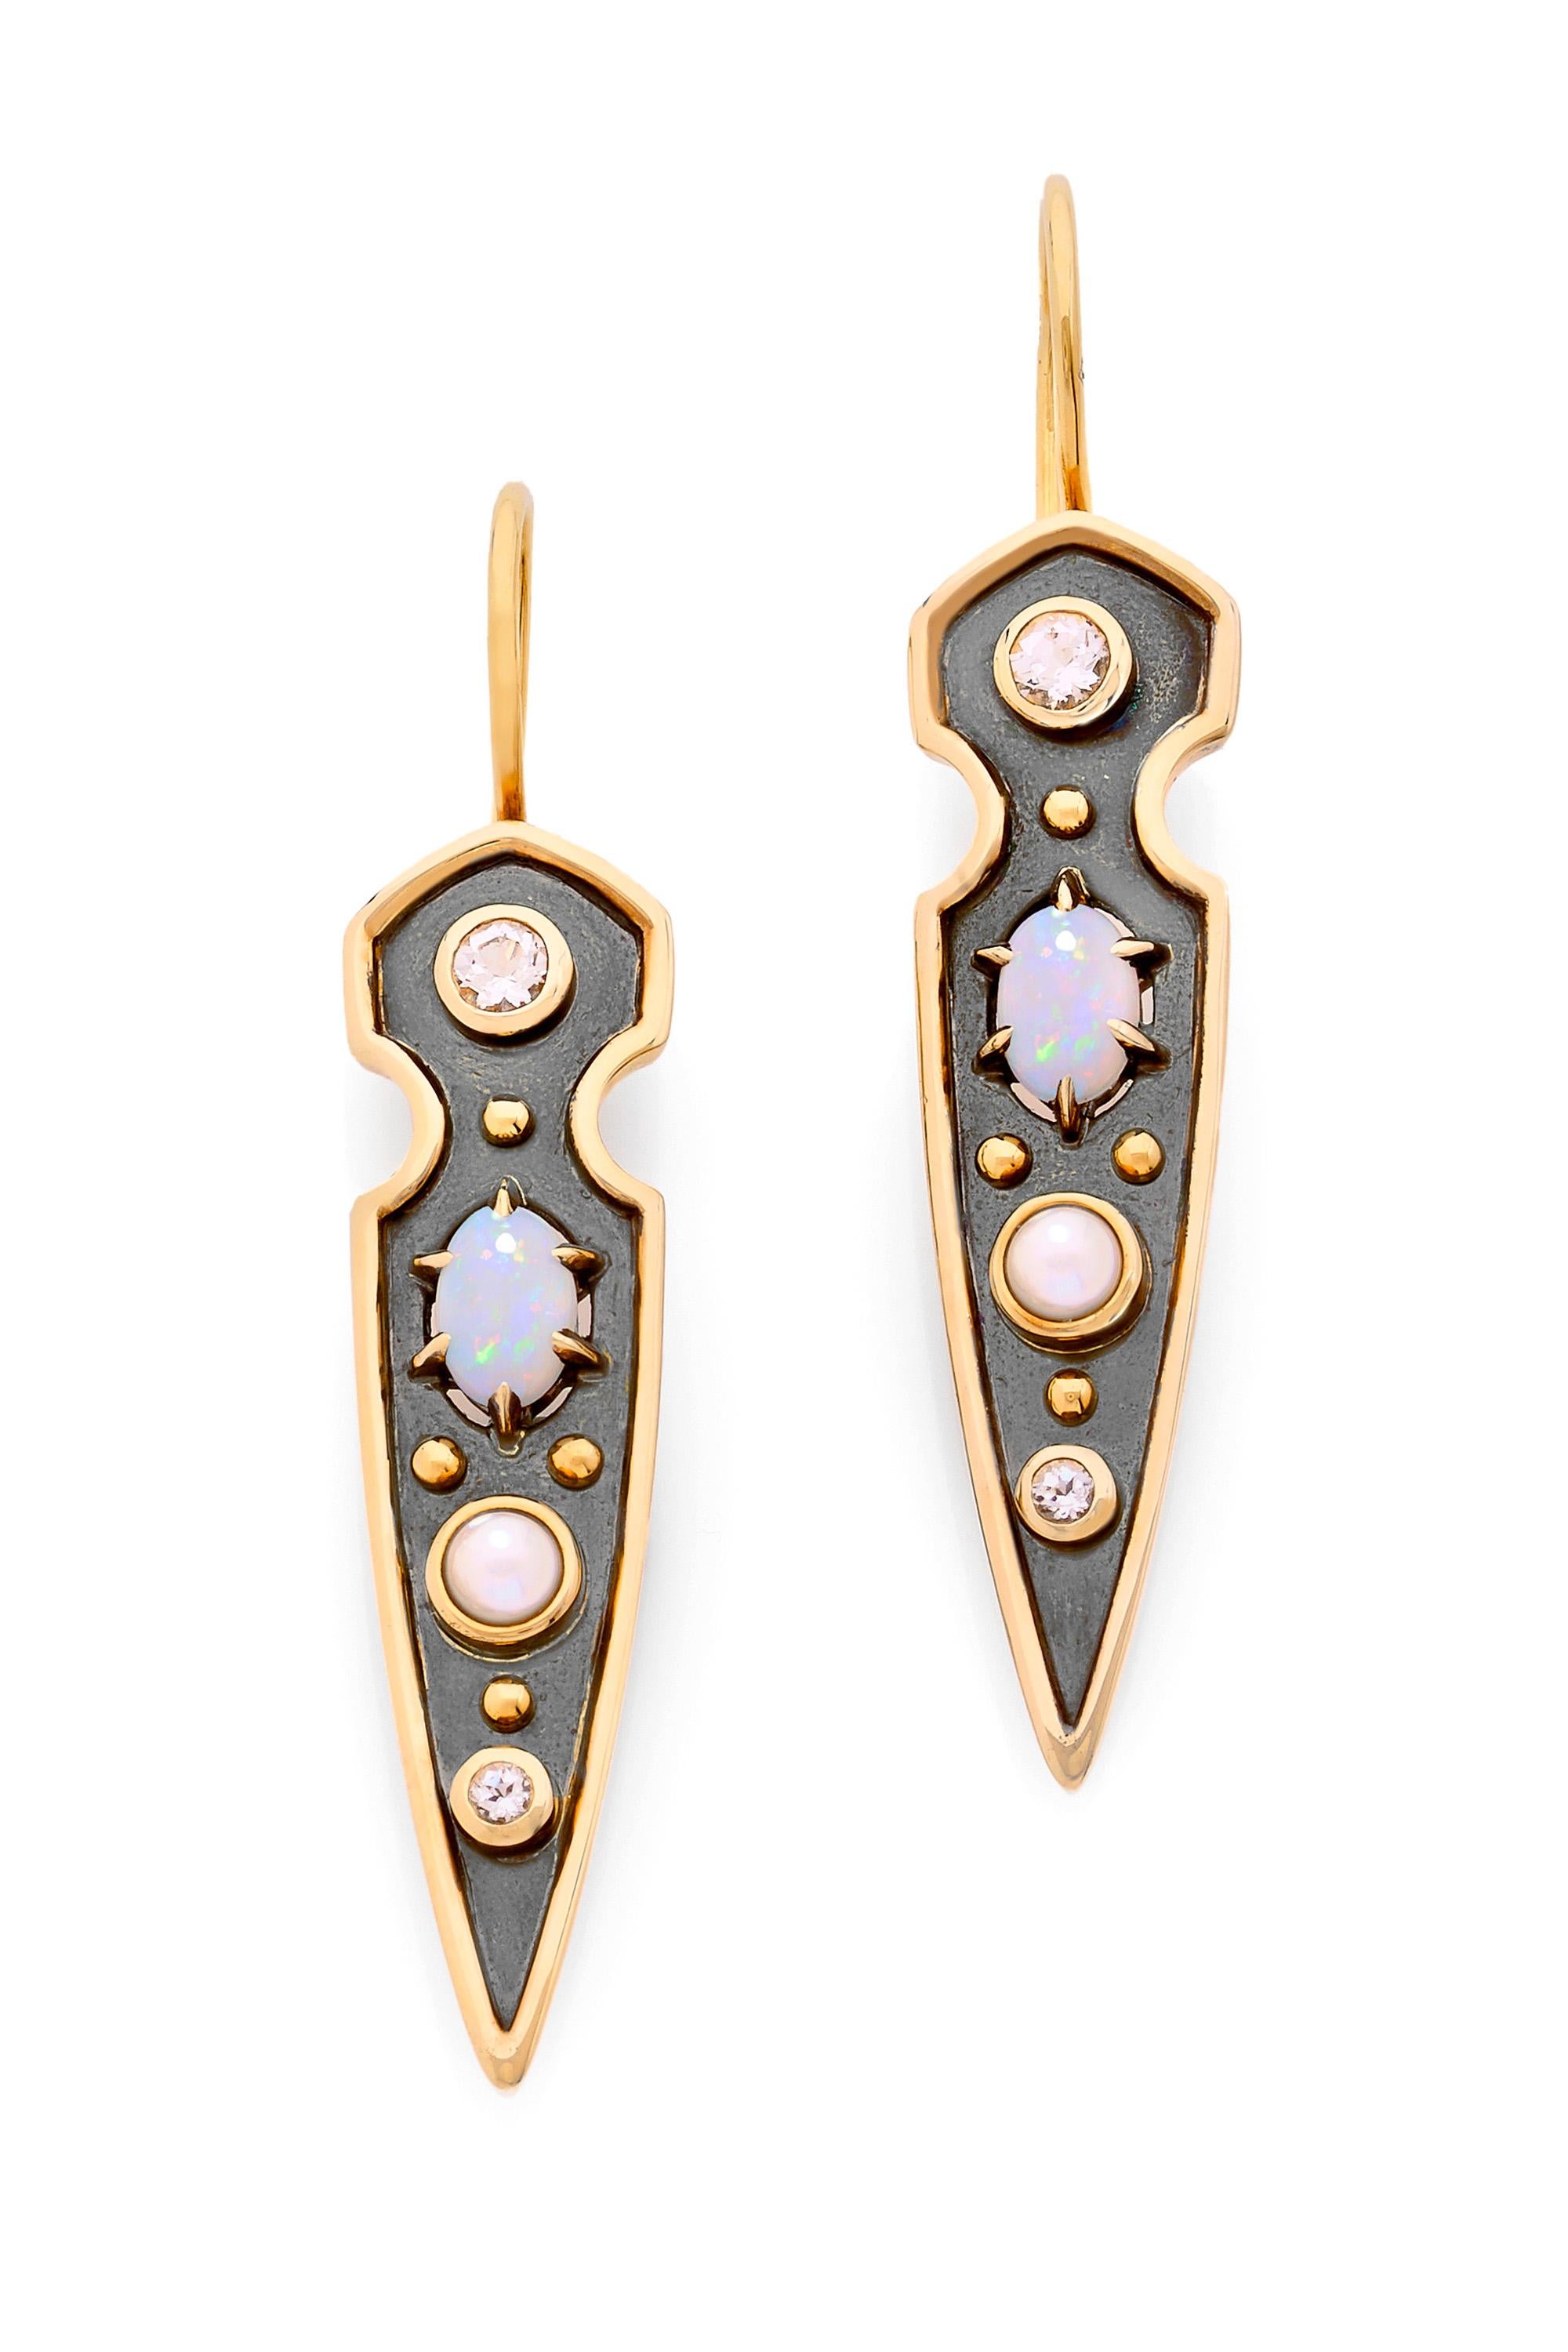 Yellow gold and distressed silver earrings,  studded with opal, akoya pearls and white topazes.

Details:
Opal, Topaz and Akoya Pearls 
18k Yellow Gold: 7g  
Distressed Silver: 3g 
Made in France
